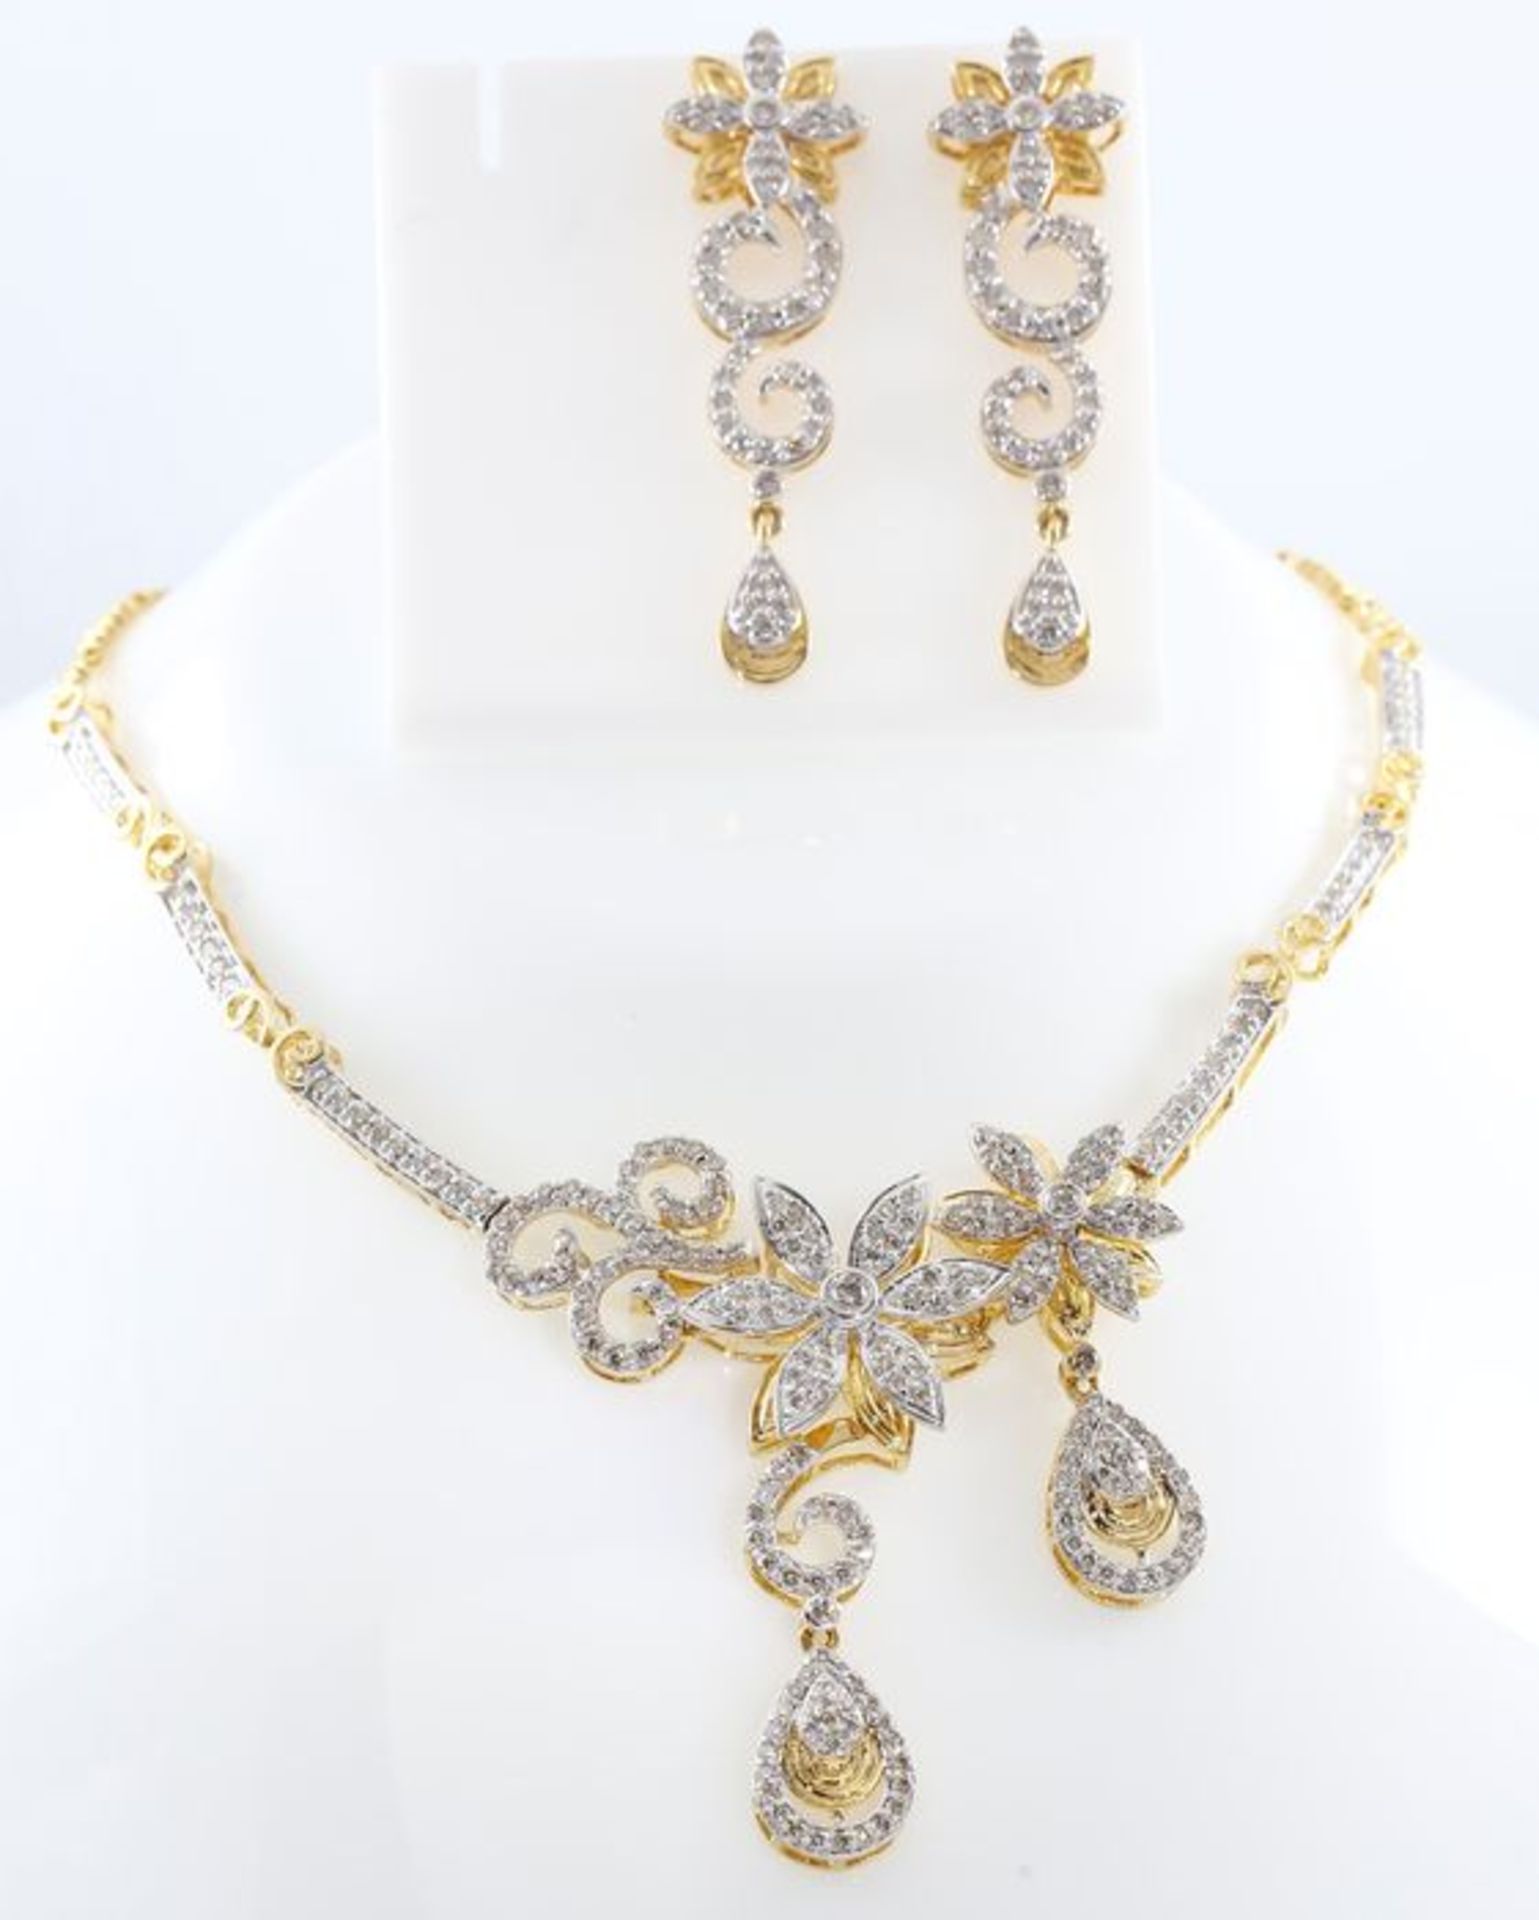 IGI Certified 14 K / 585 Yellow Gold Diamond Necklace with Matching Chandelier Earrings - Image 4 of 8